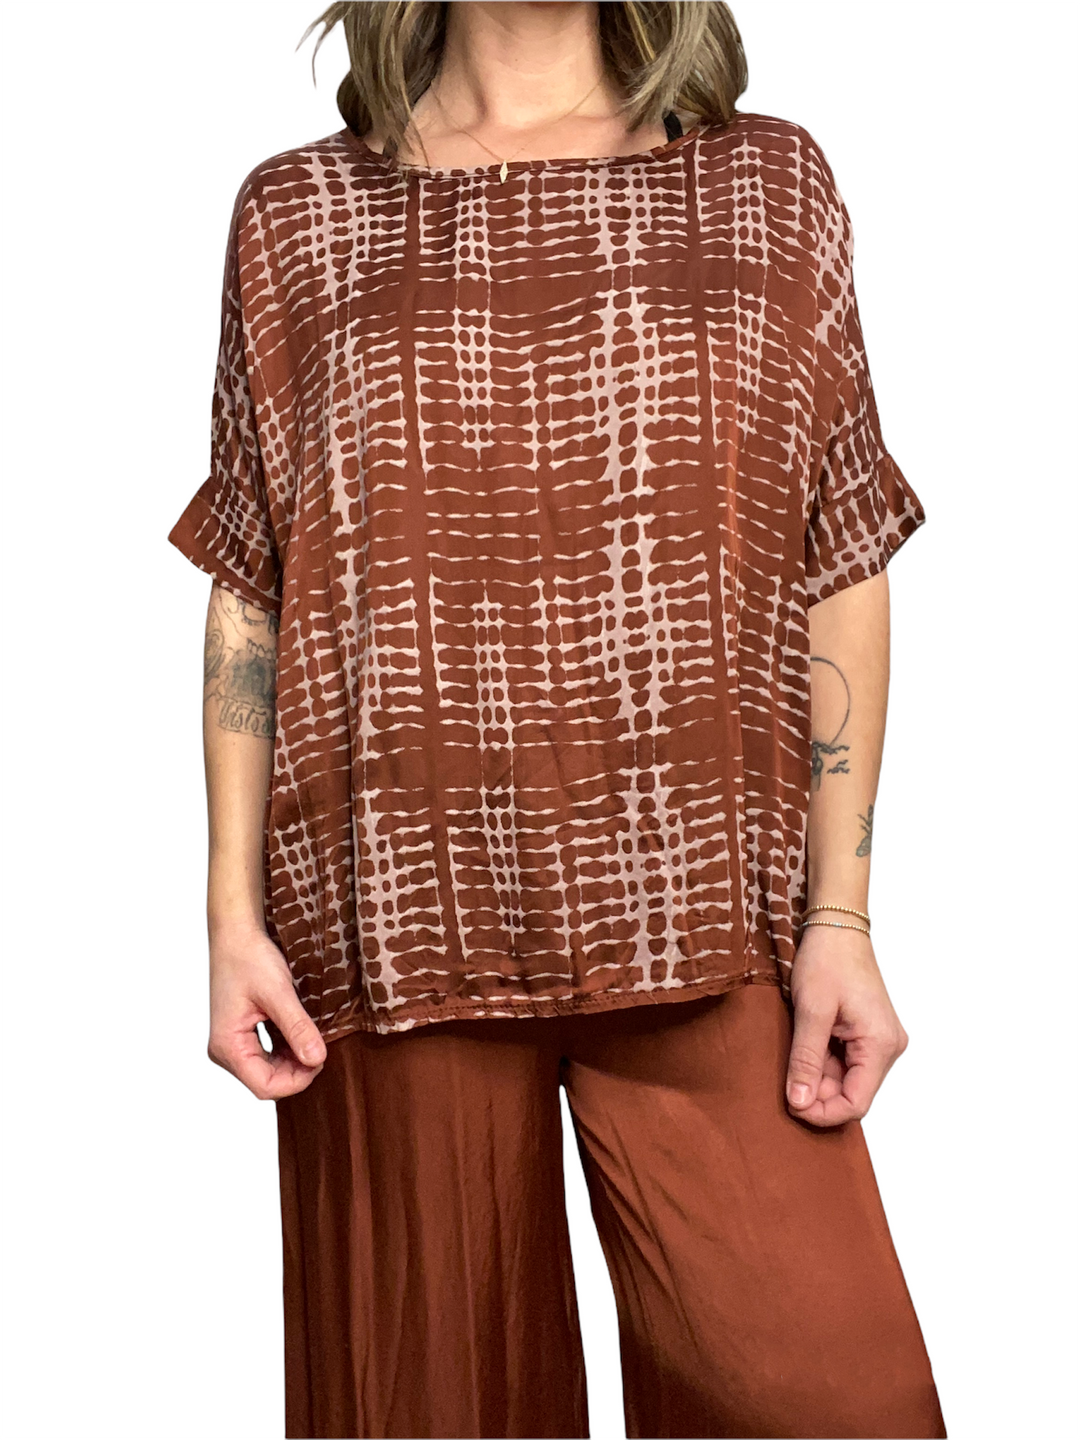 SILK PLAID TOP - Kingfisher Road - Online Boutique